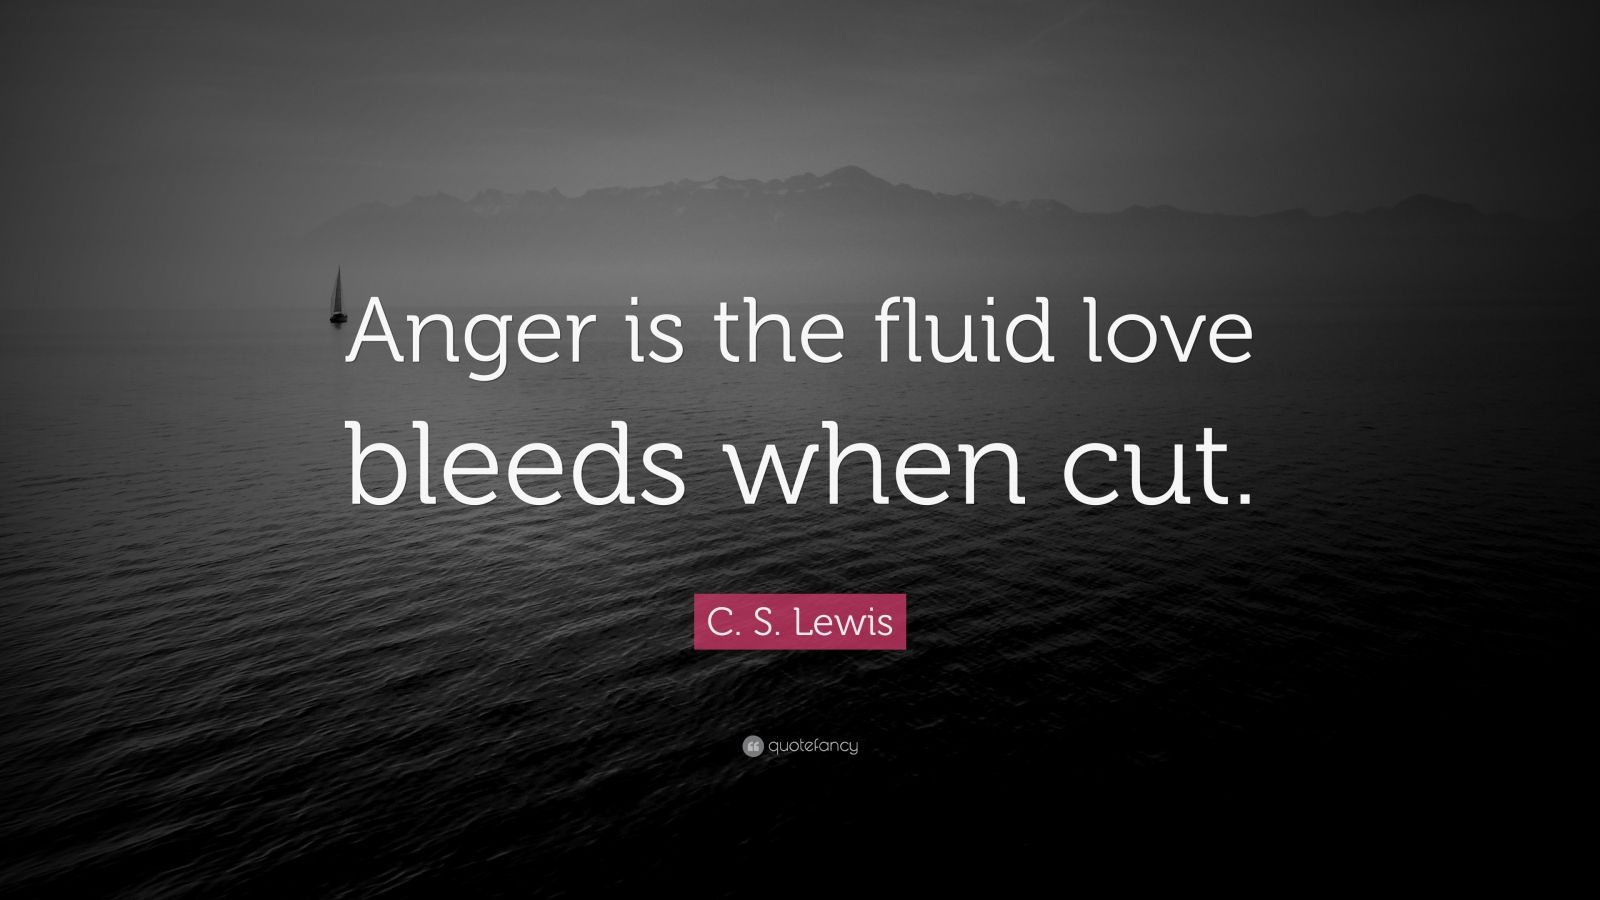 C S Lewis Quote “anger Is The Fluid Love Bleeds When Cut” 7